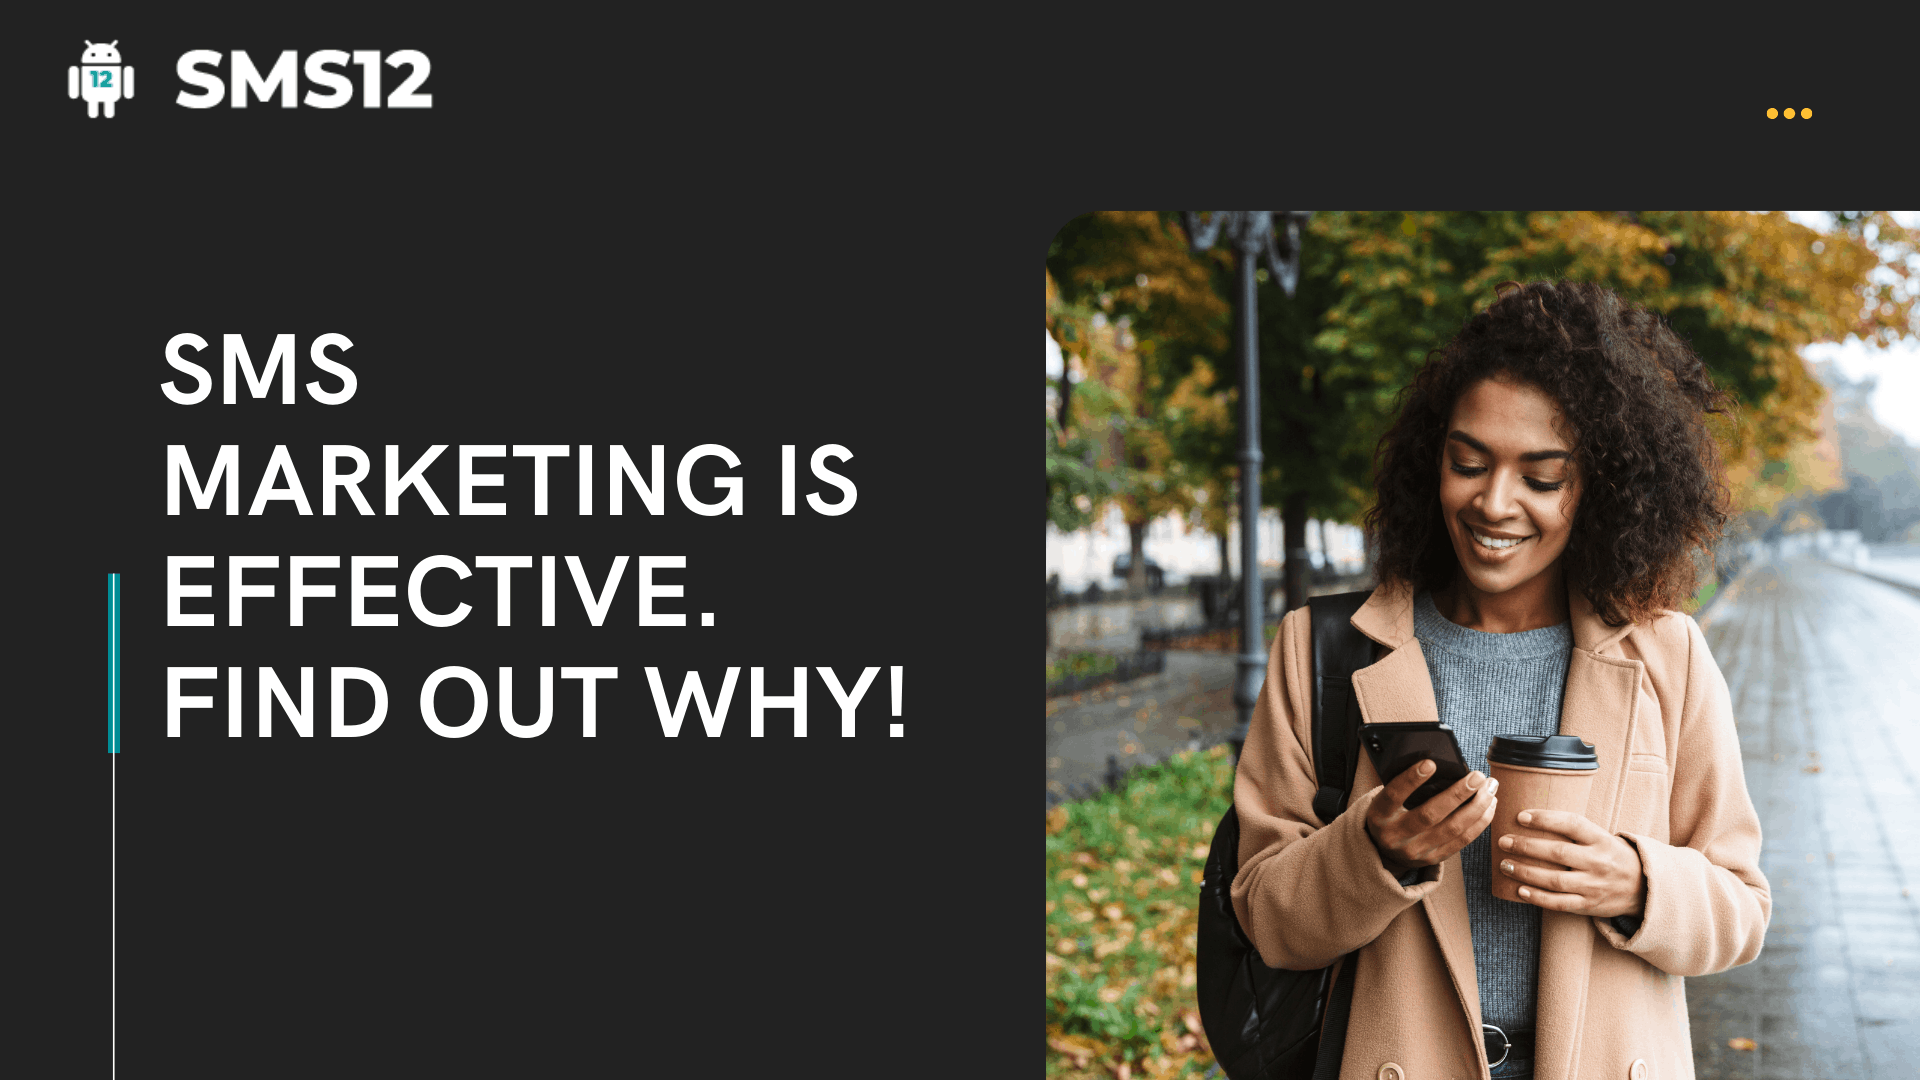 SMS Marketing is Effective. Find Out Why!